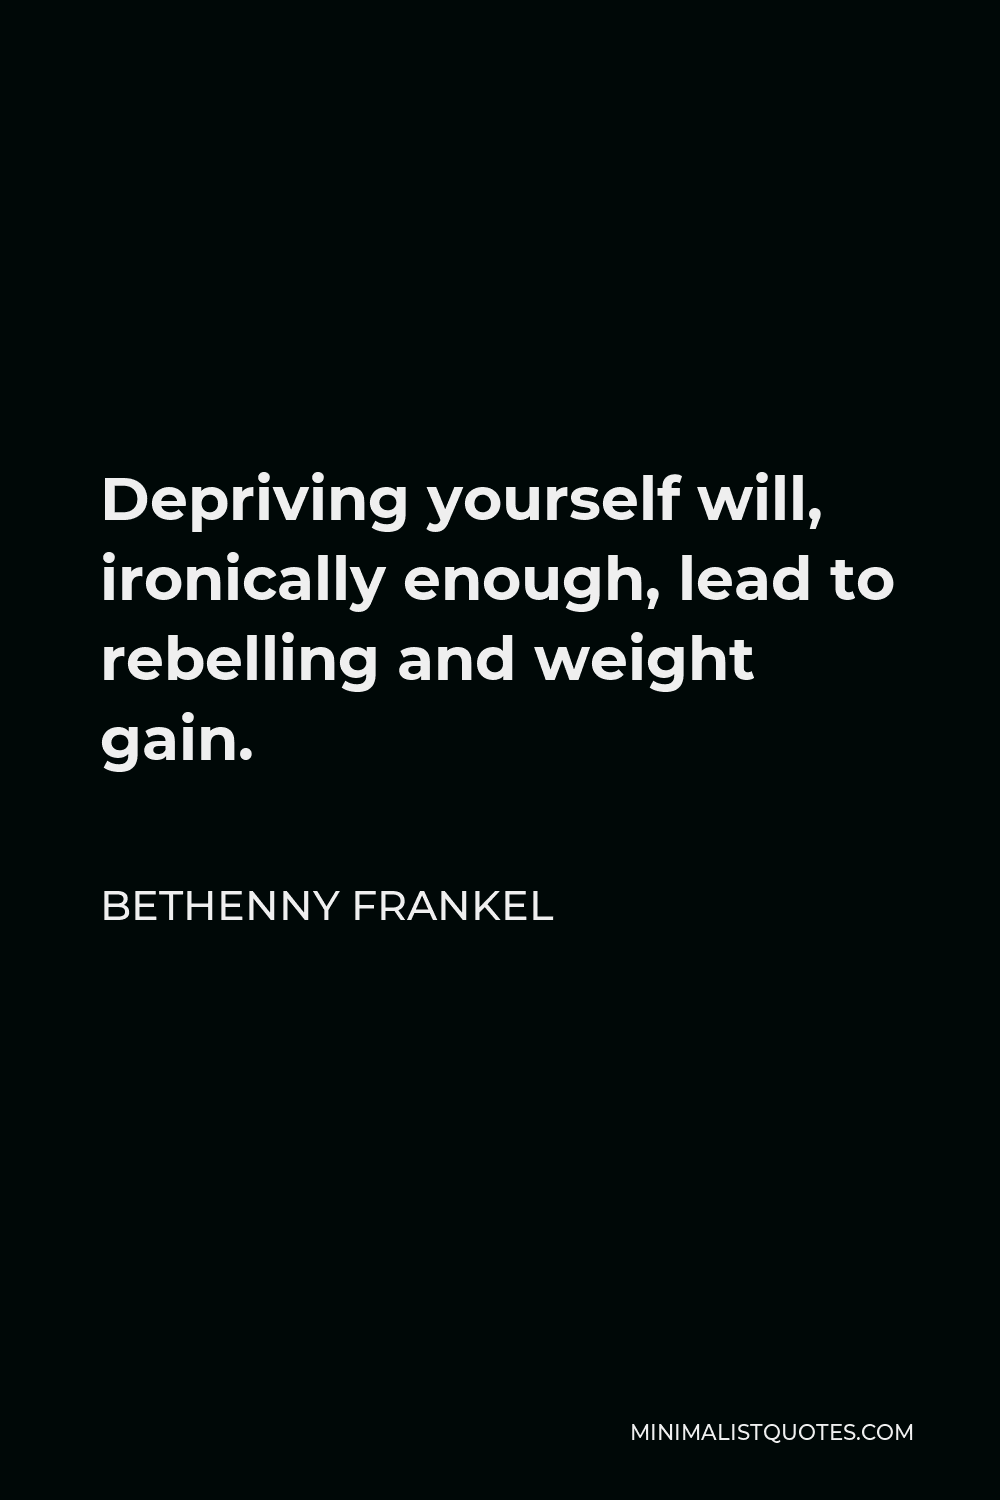 Bethenny Frankel Quote - Depriving yourself will, ironically enough, lead to rebelling and weight gain.